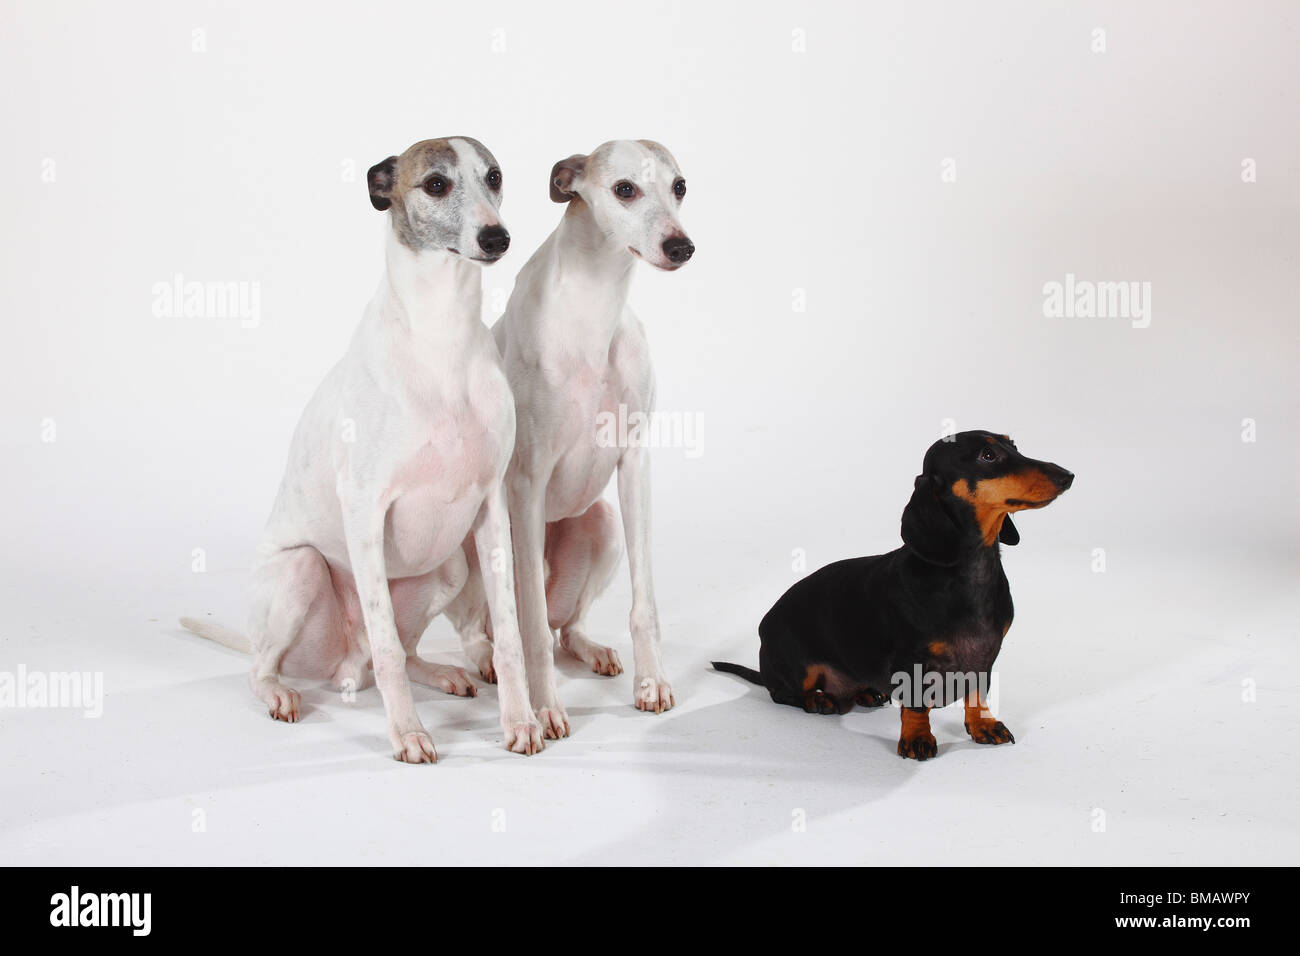 Smooth haired Dachshund and Whippets Stock Photo